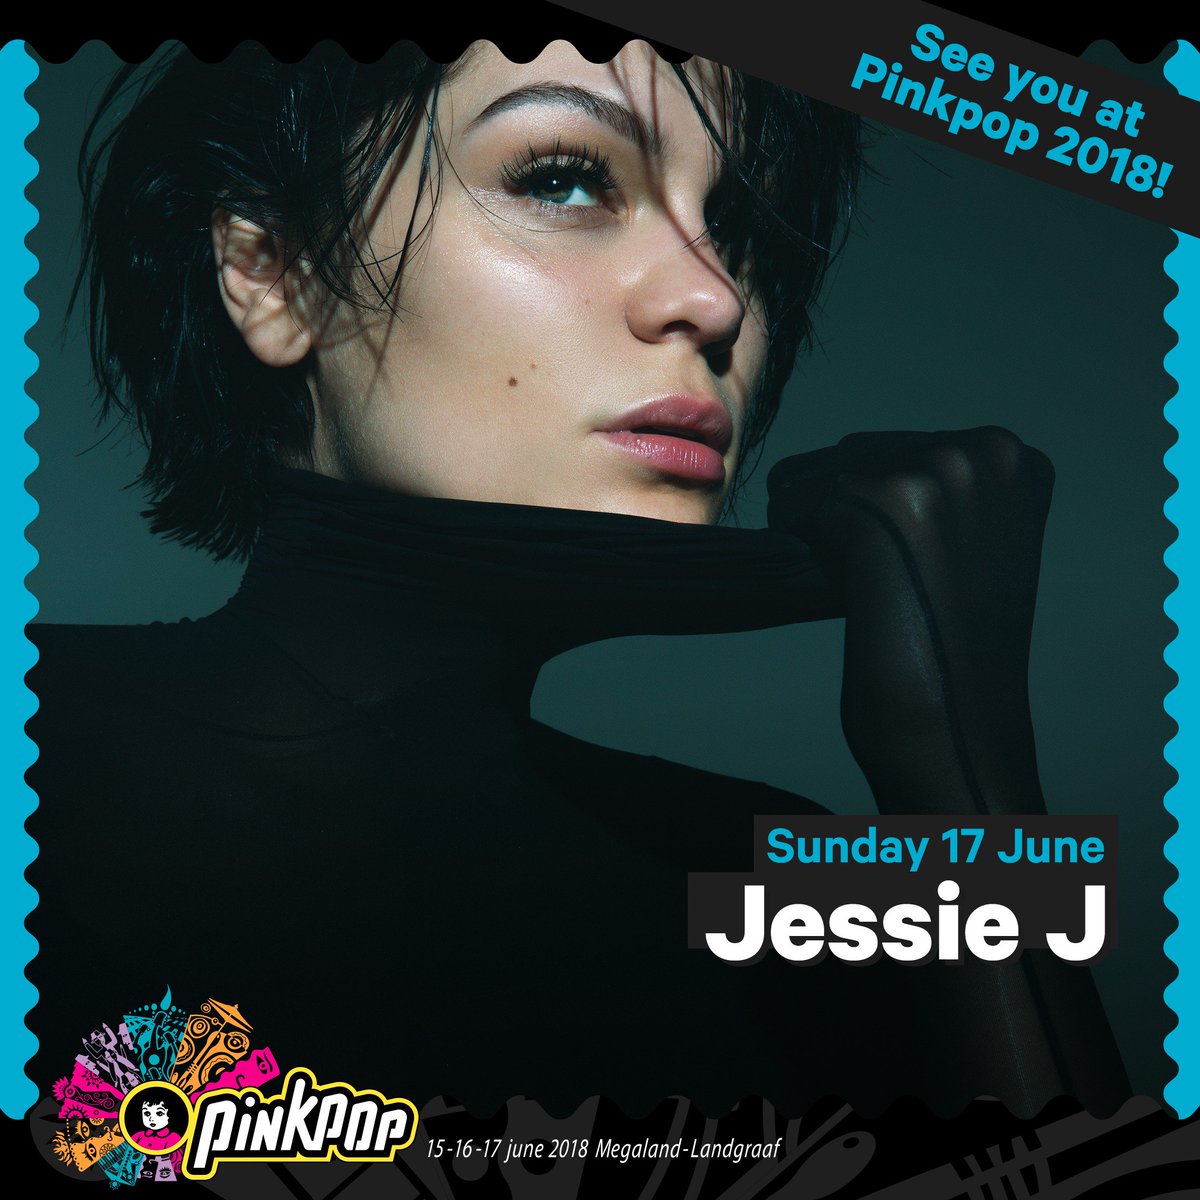 I’m playing @pinkpopfest in the Netherlands on the 17th of June! ????

https://t.co/KXZEkiIH1j https://t.co/QFnFSnkiPd